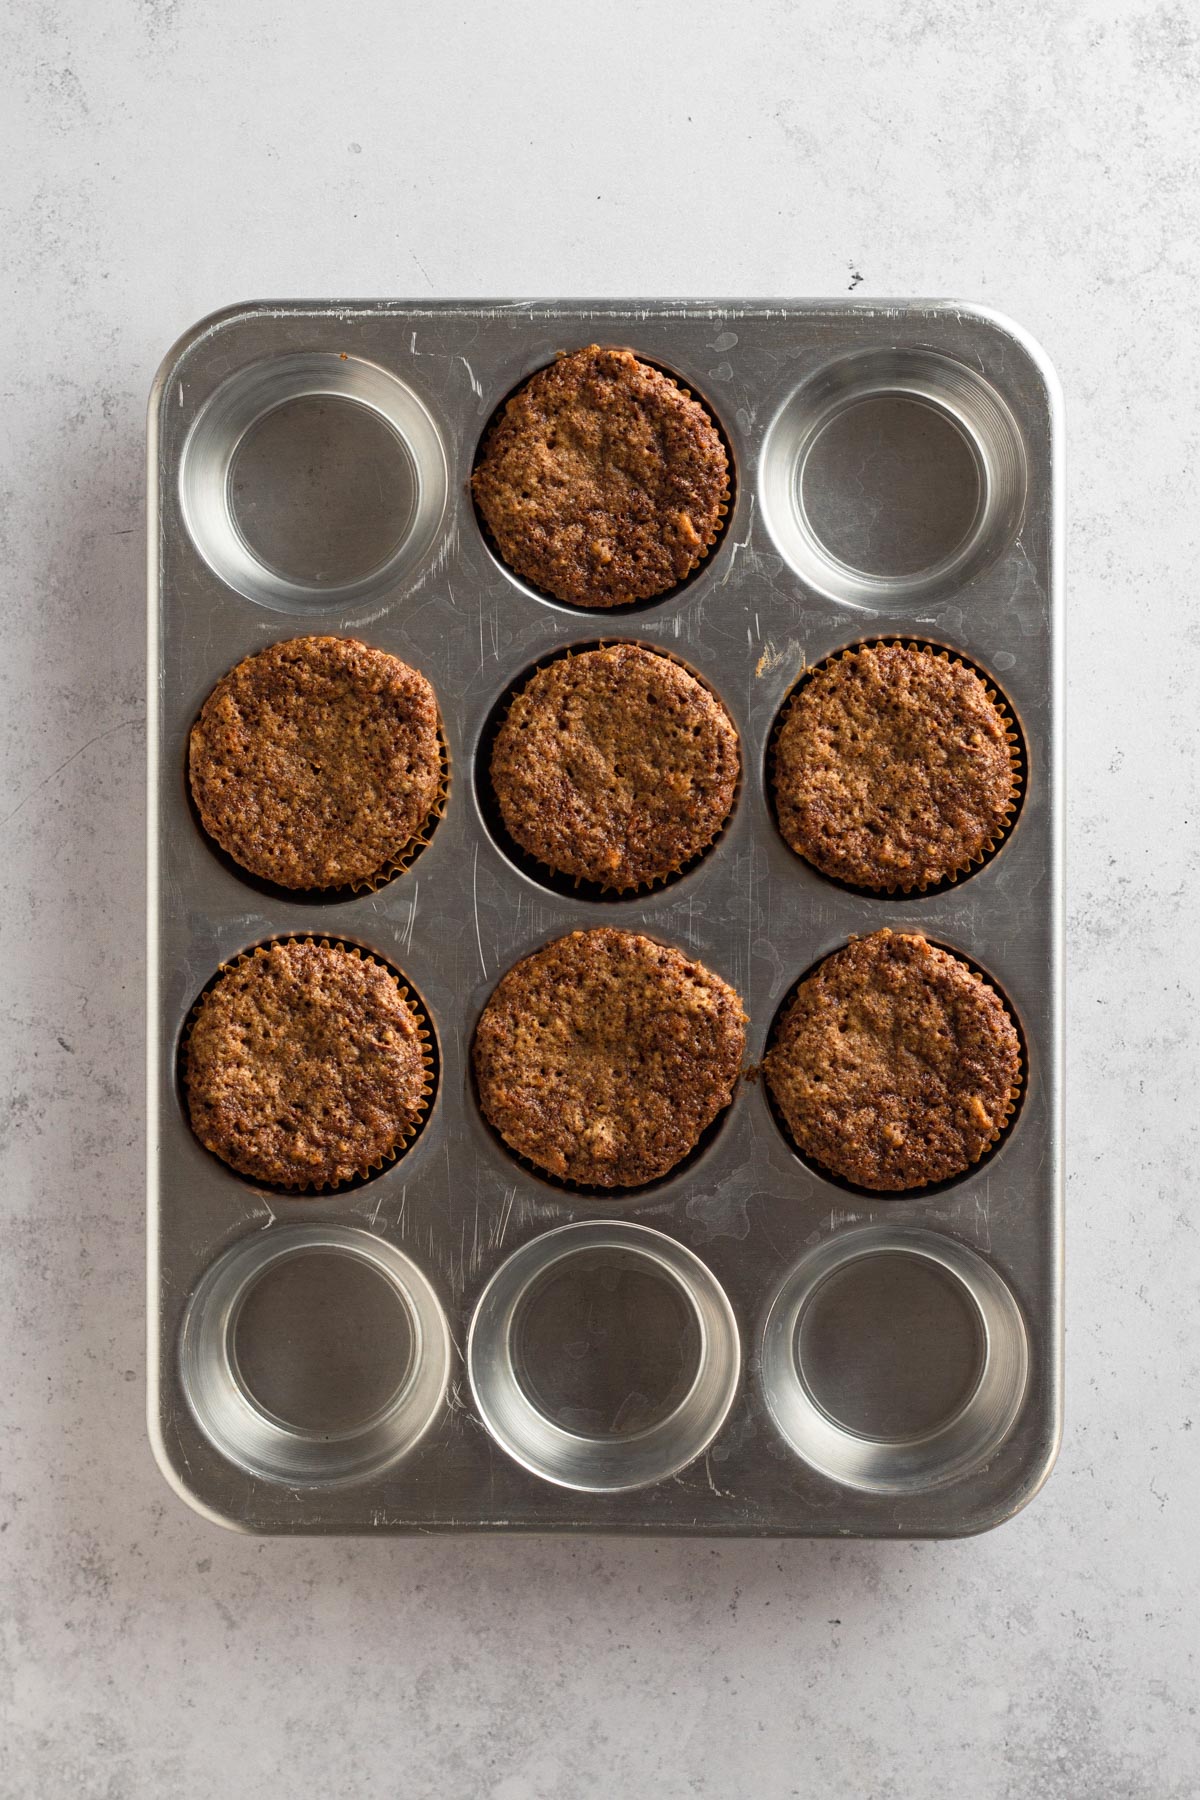 baked cupcakes in a muffin tin